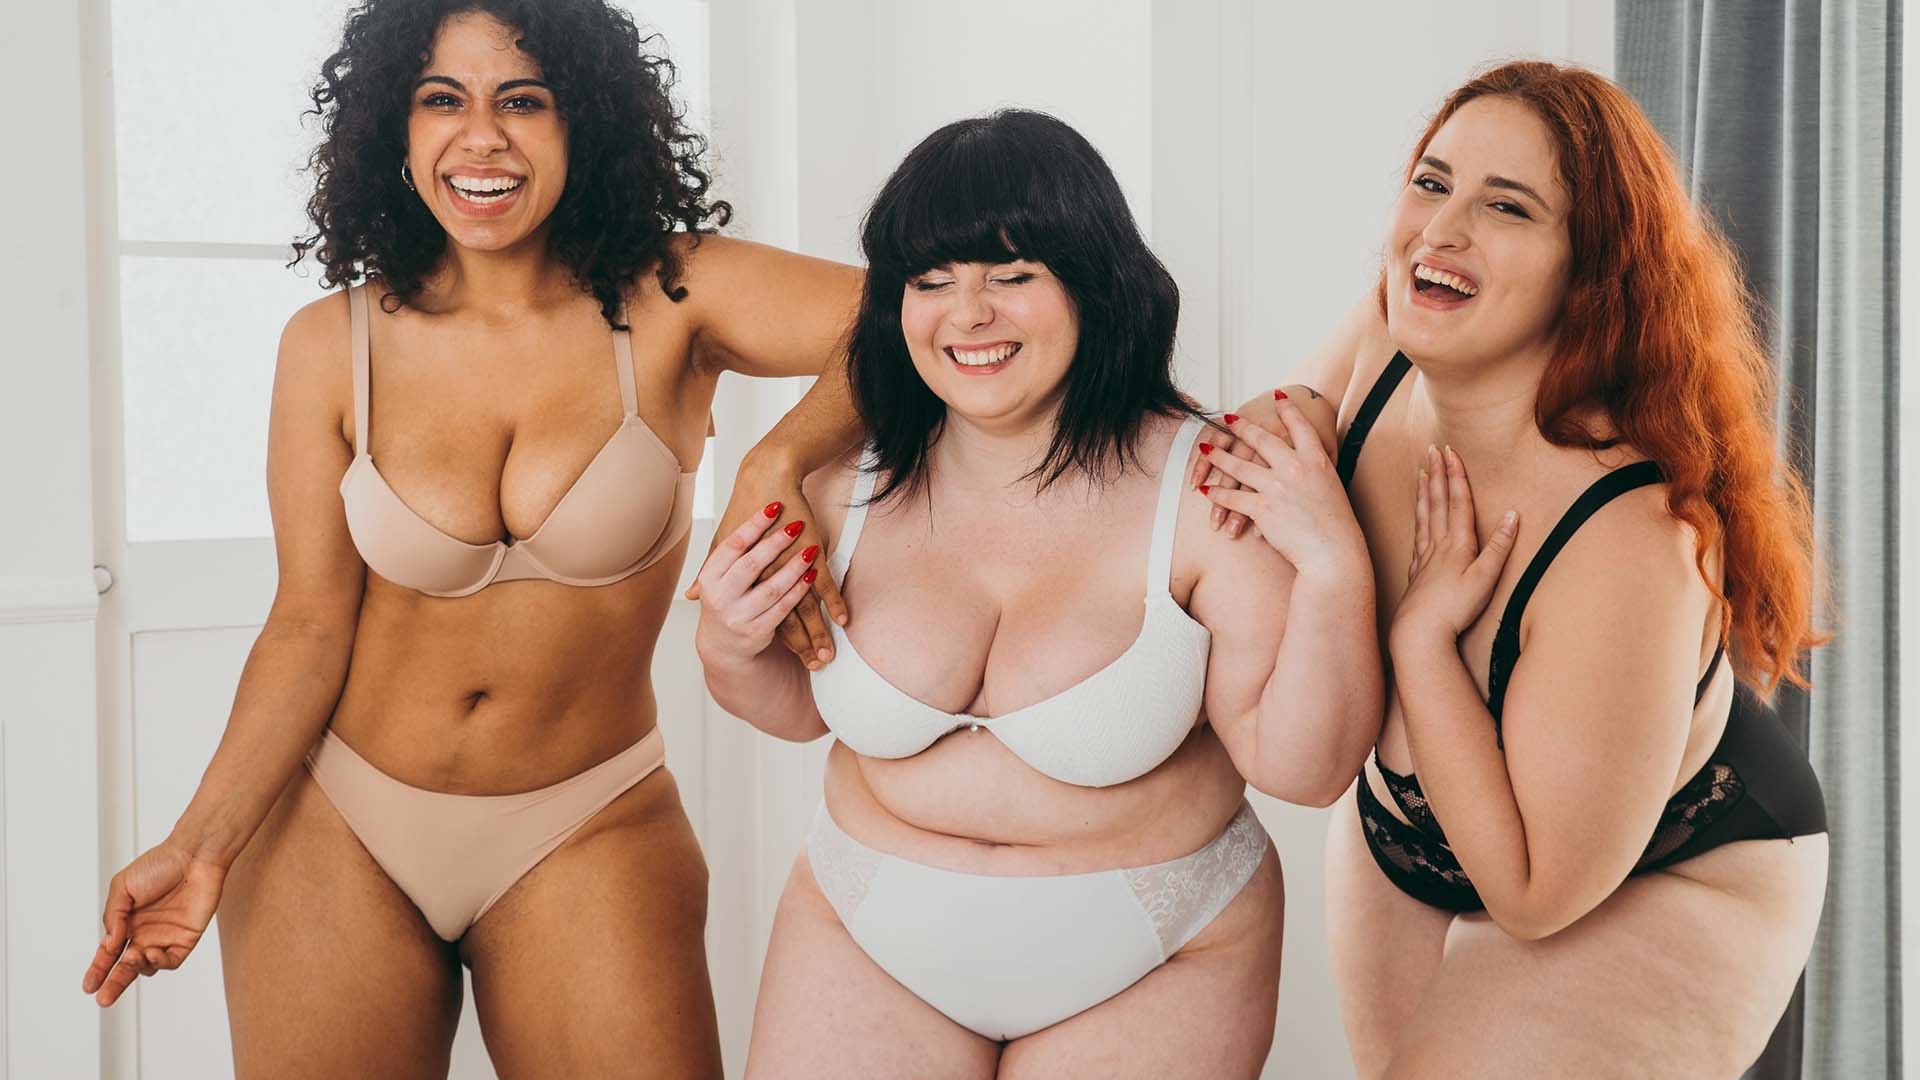 three plus-sized women in their underwear standing next to each other and laughing. Grey curtain in the background.